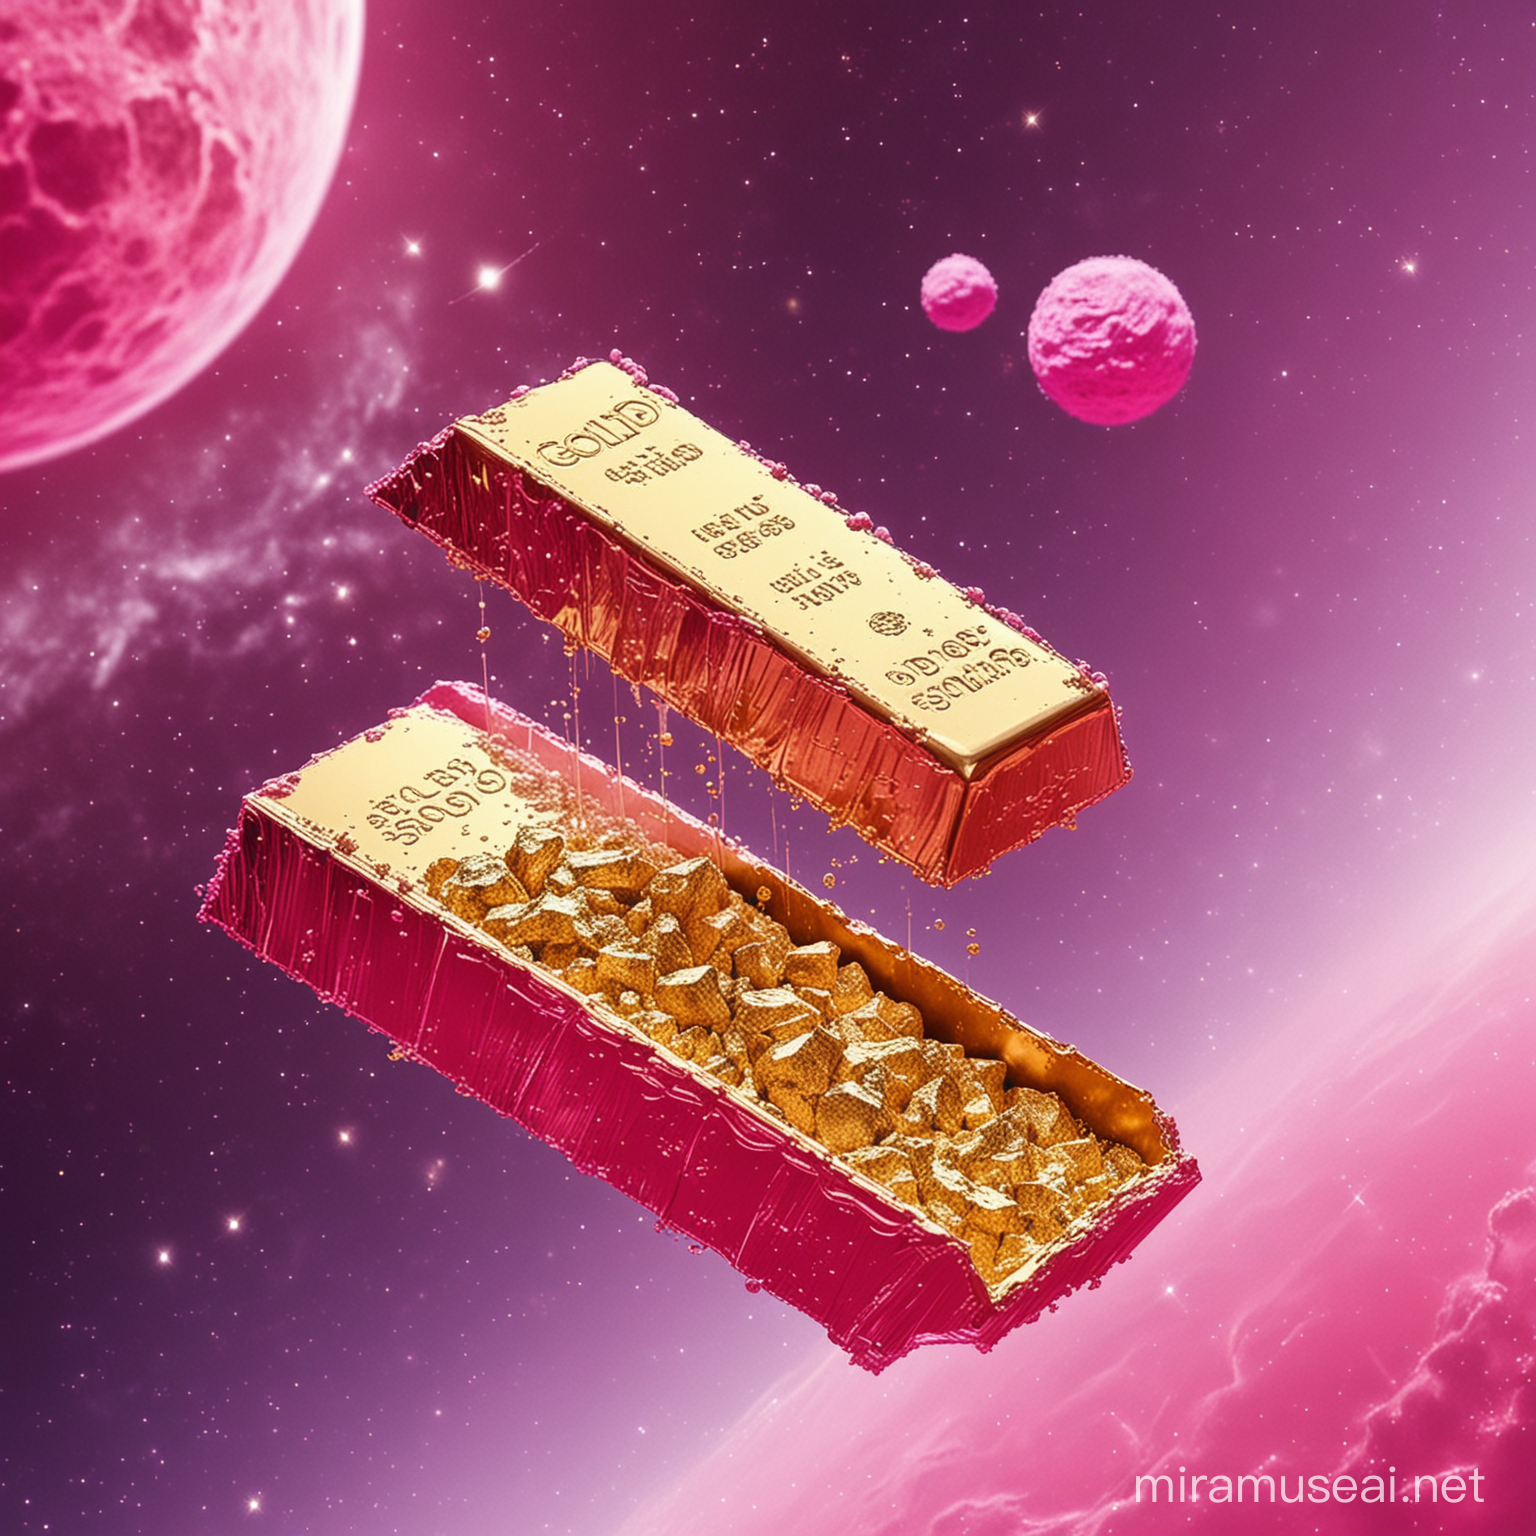 gold prices soared into space colorful picture in bright pink color

